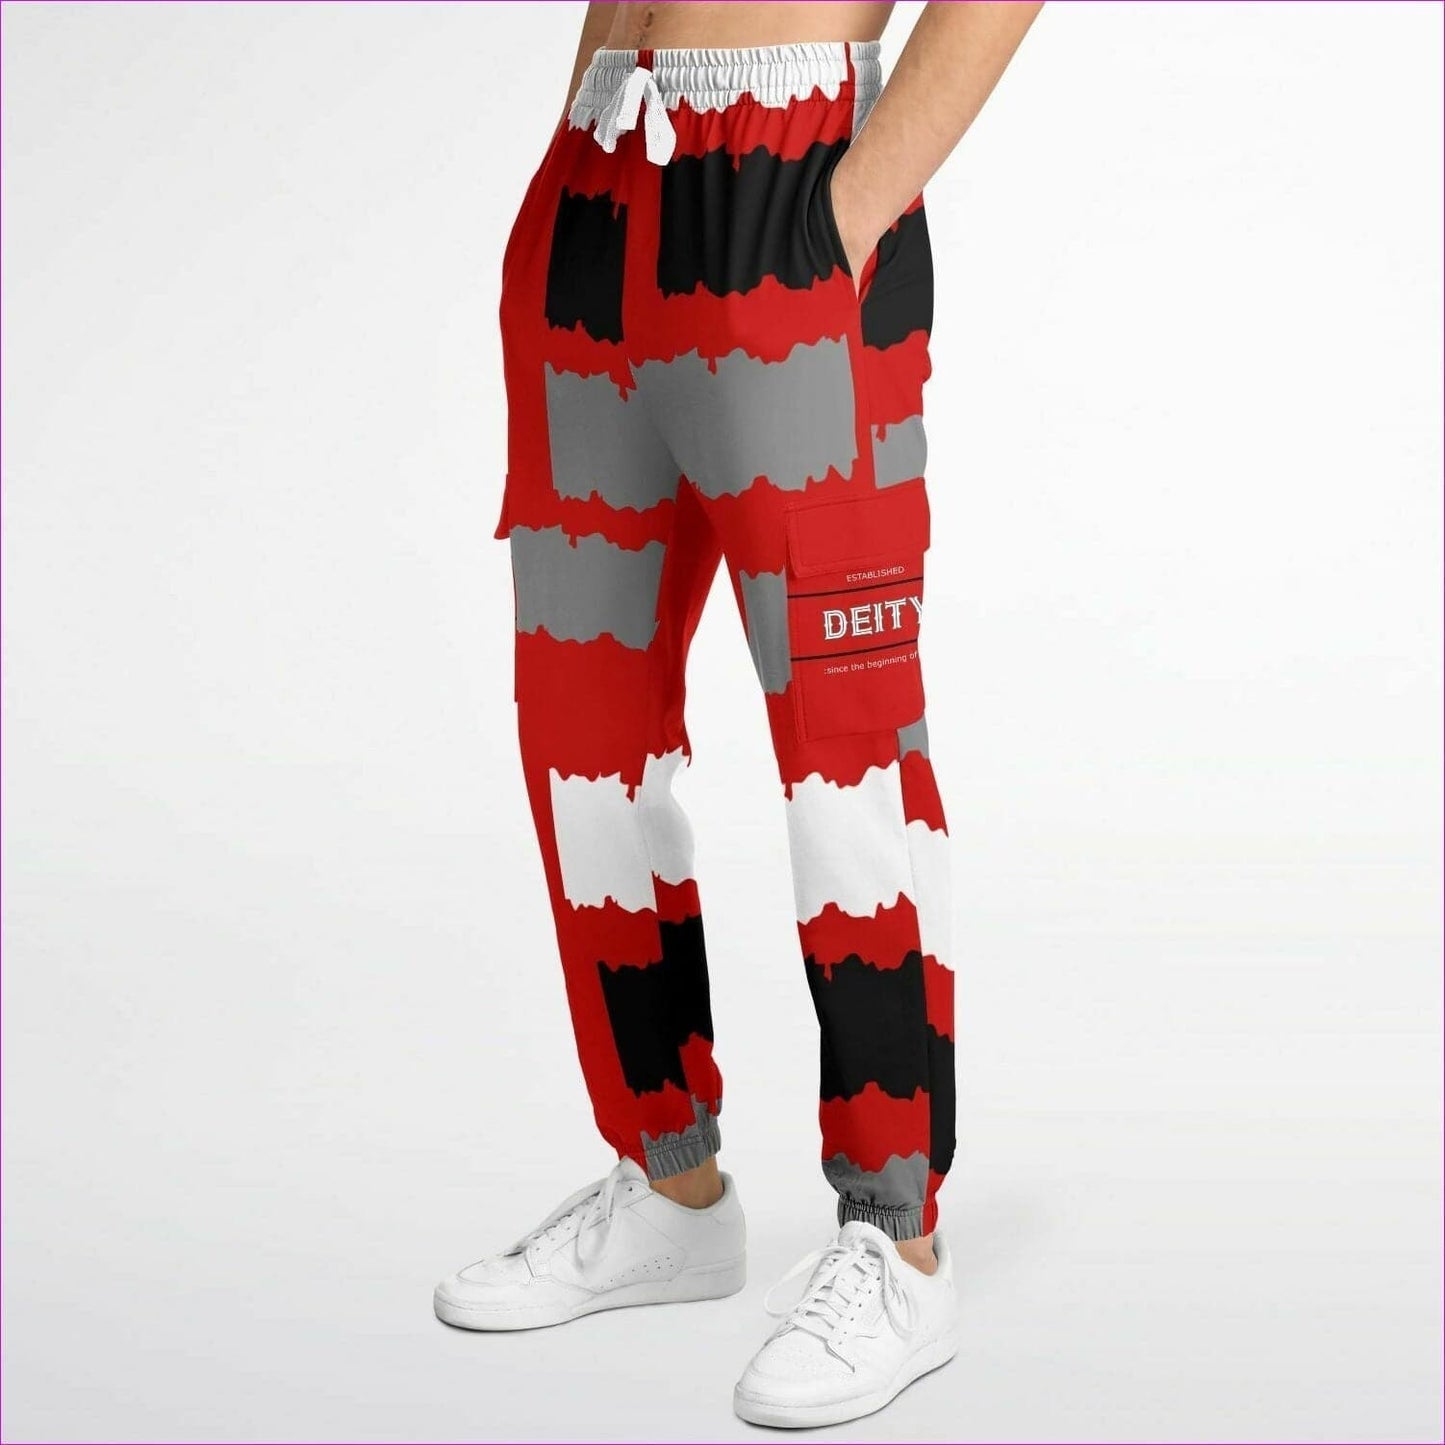 Deity Premium Cargo Sweatpants in Red - Fashion Cargo Sweatpants - AOP at TFC&H Co.